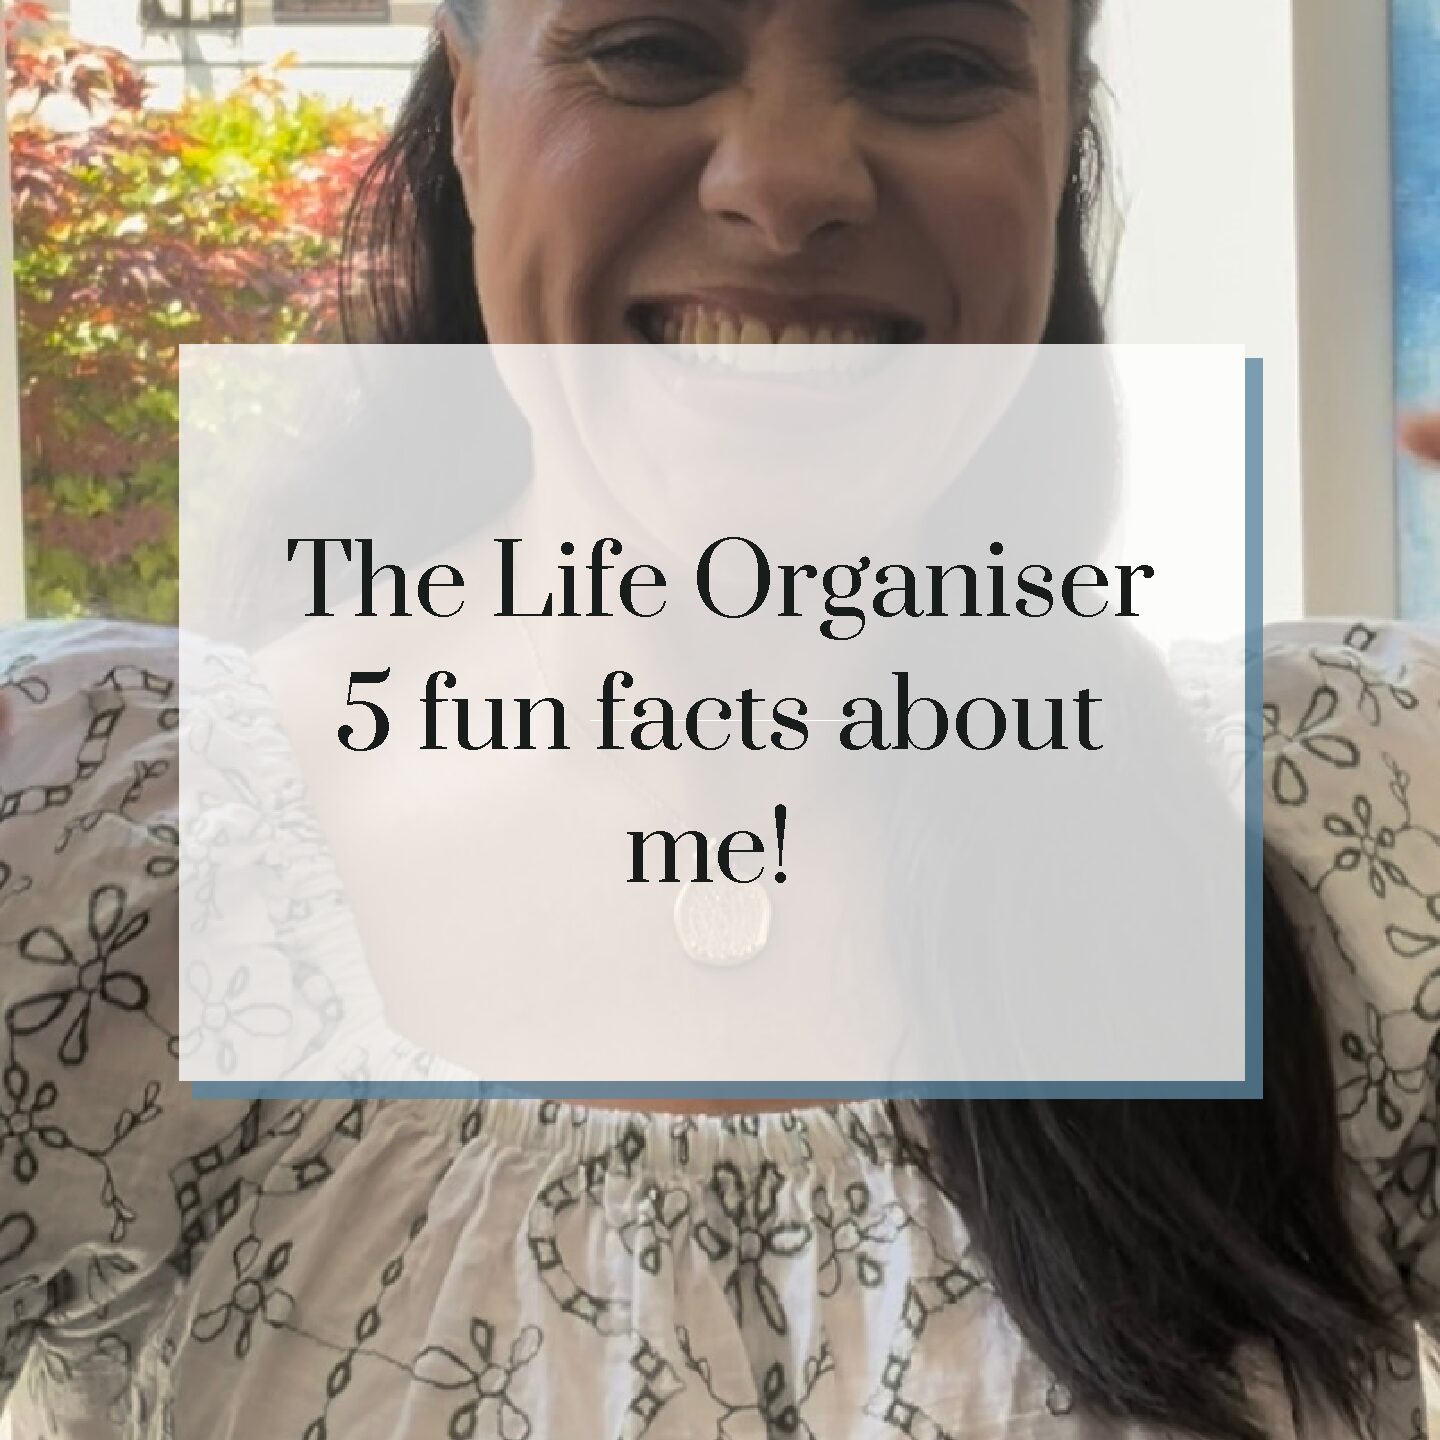 The Life Organiser – 5 fun facts About Me!